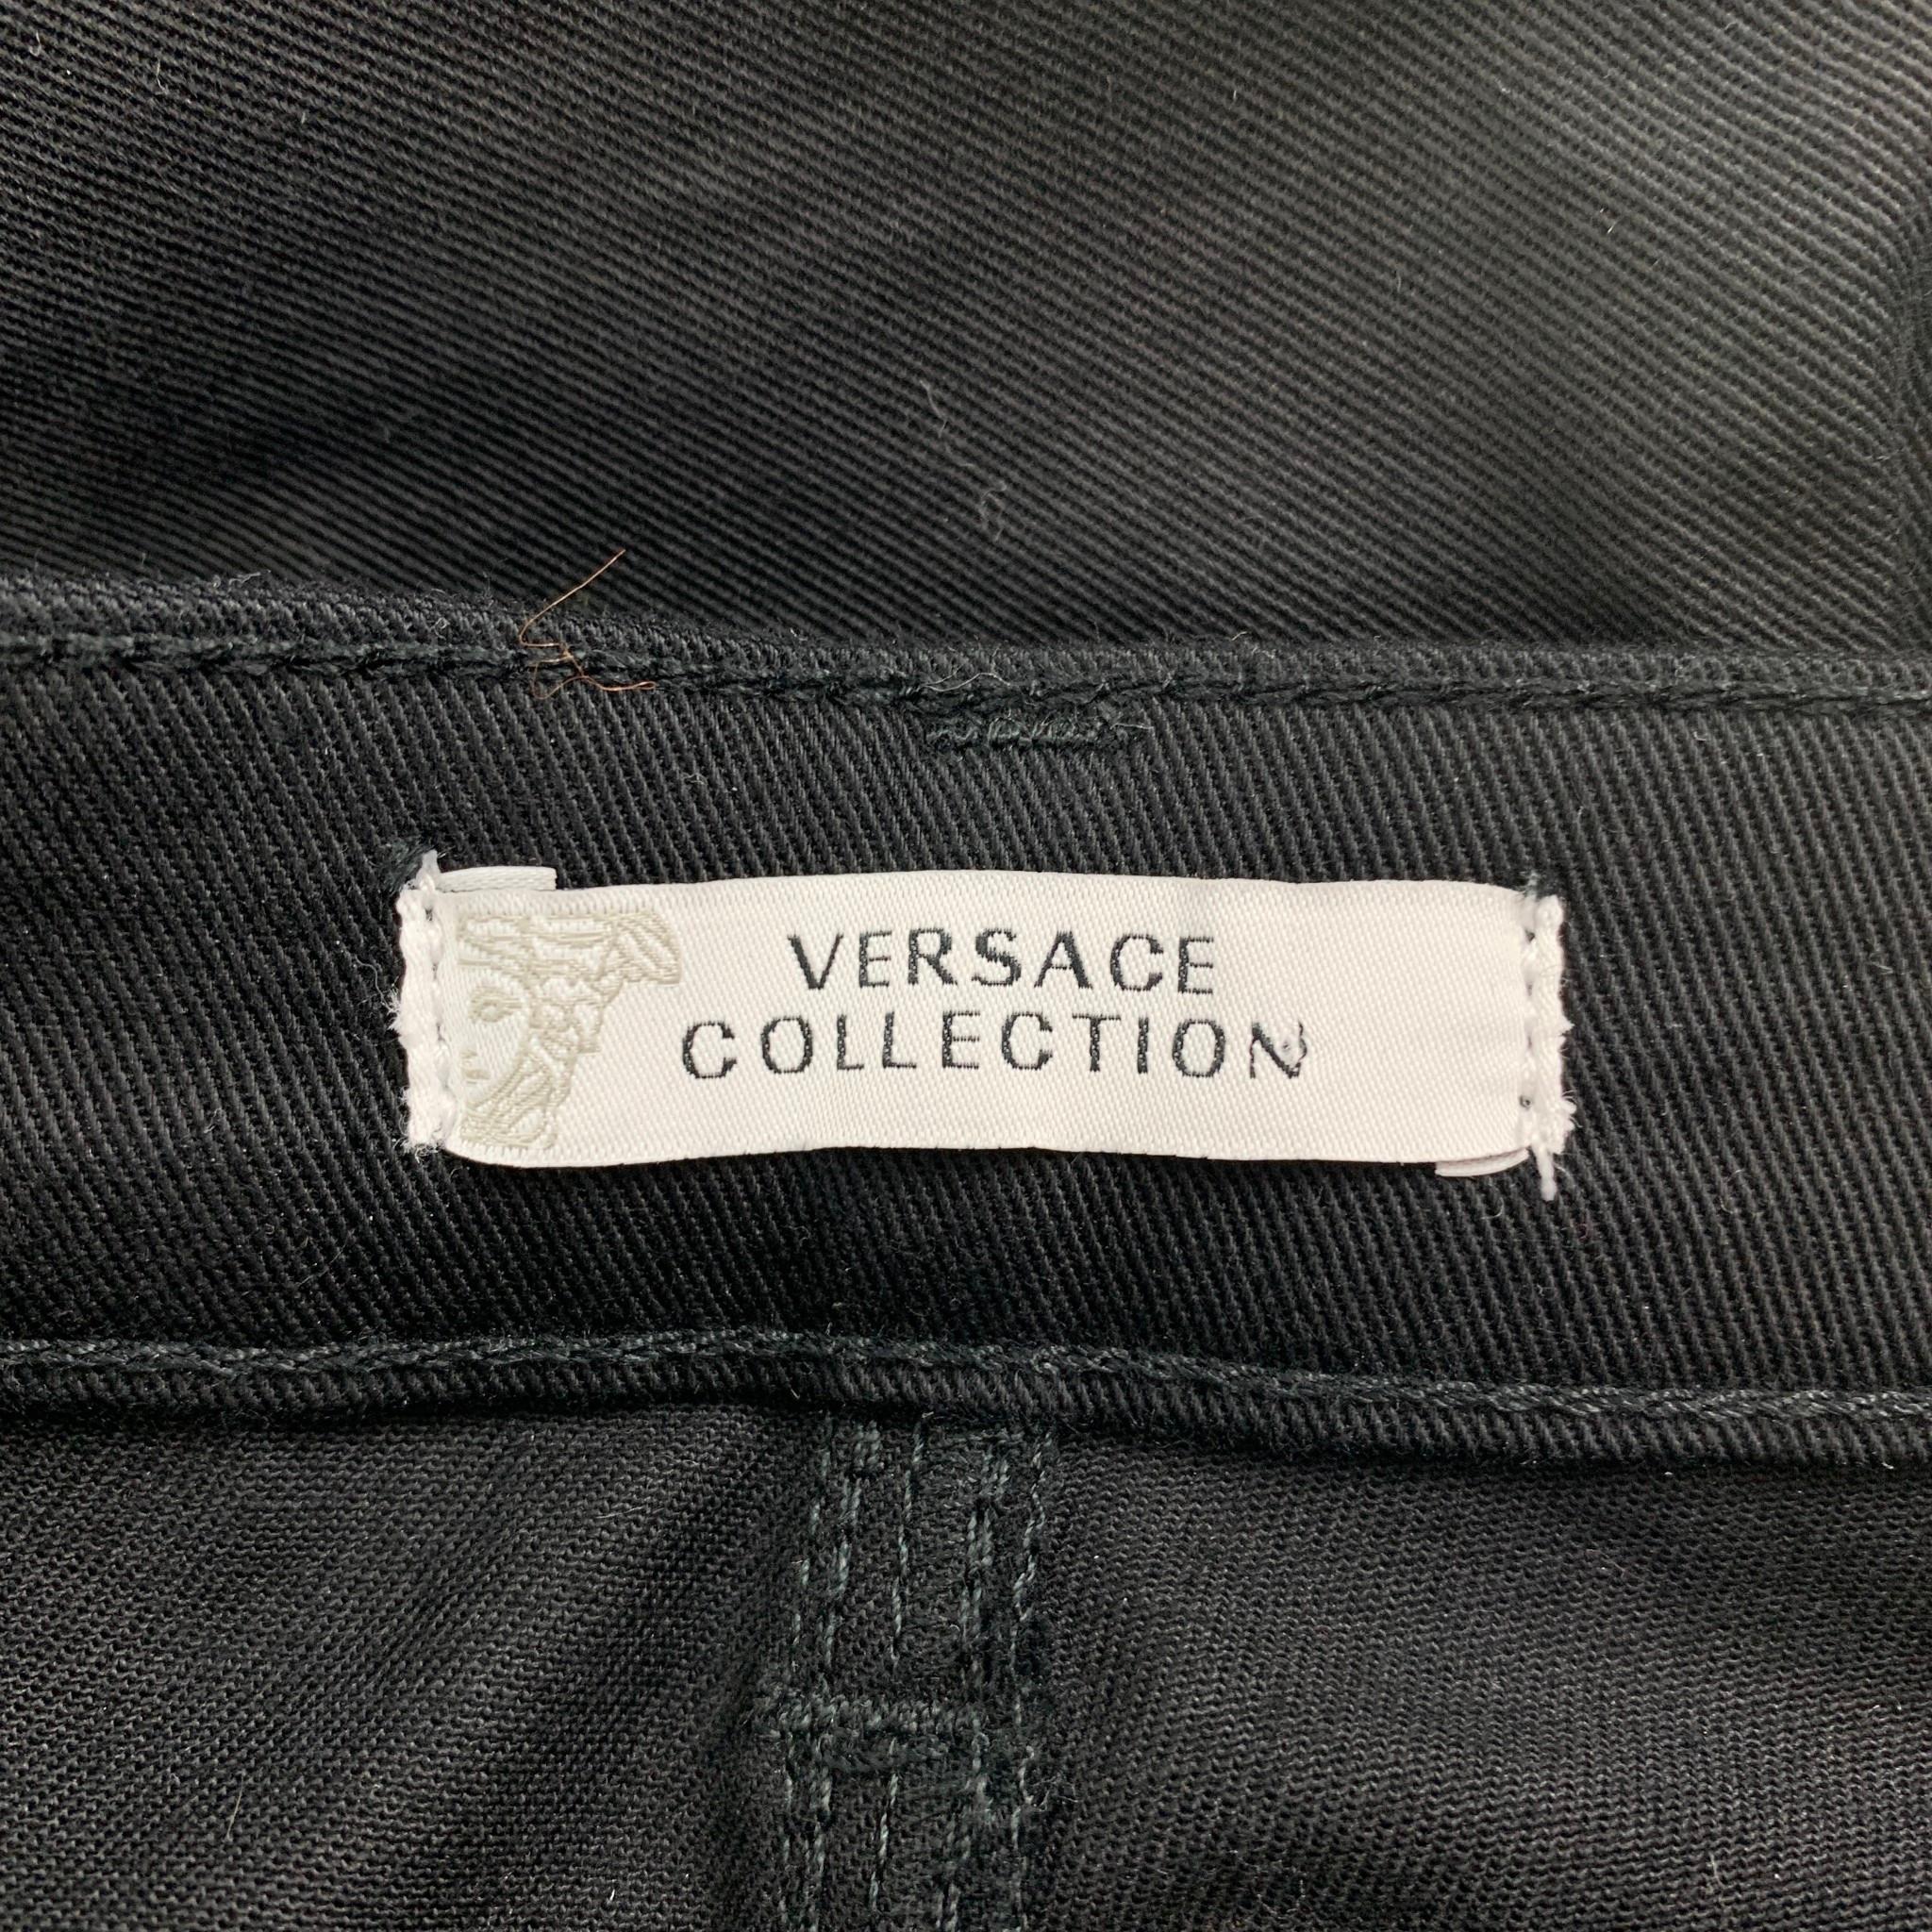 Women's VERSACE COLLECTION Size 24 Black Cotton Blend Studded Skinny Casual Pants